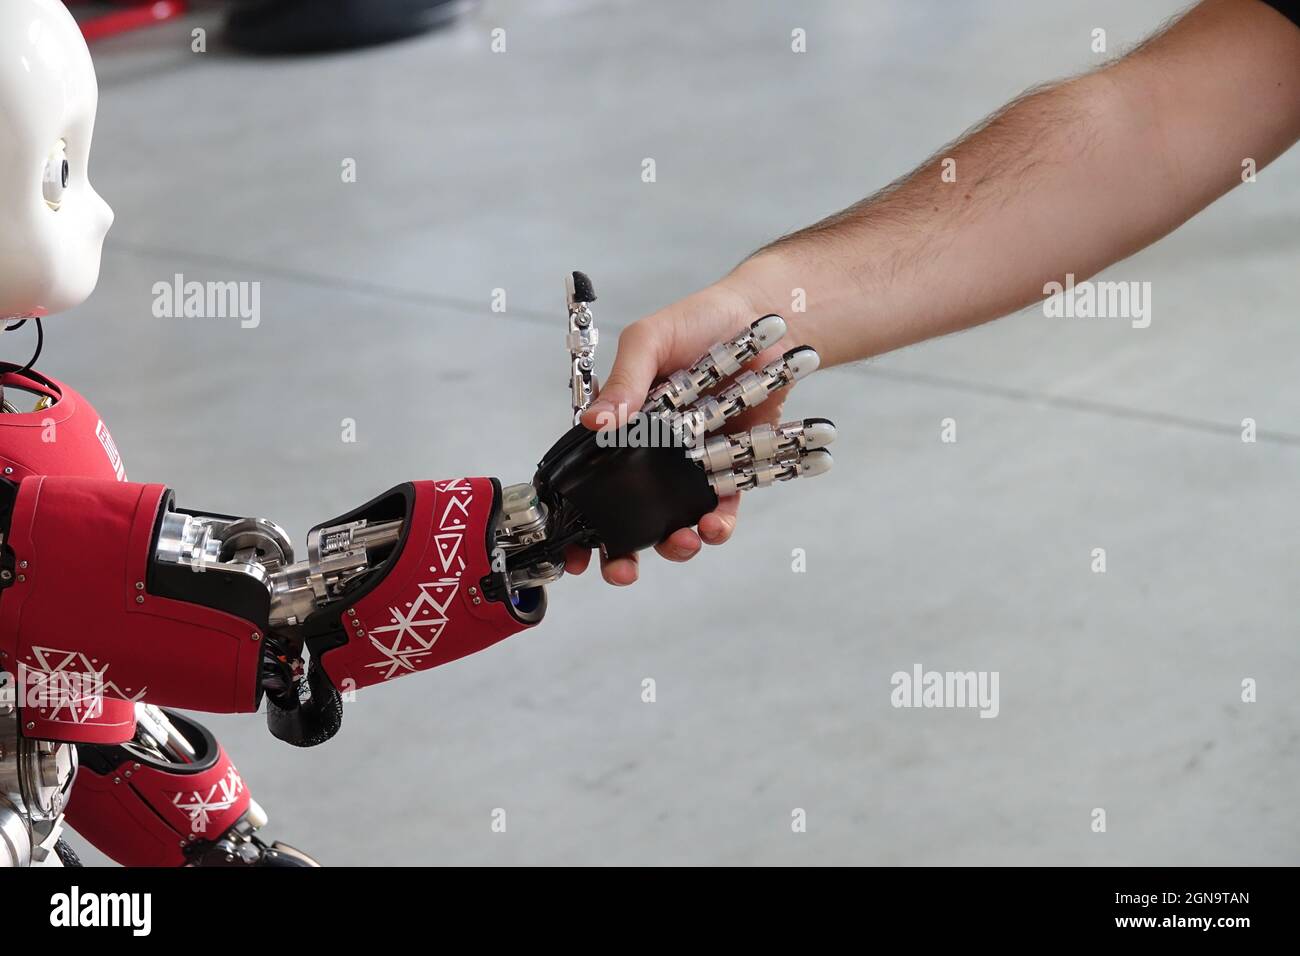 iCub, the small humanoid created by the Italian Institute of Technology. Genoa, Italy - September 2021 Stock Photo